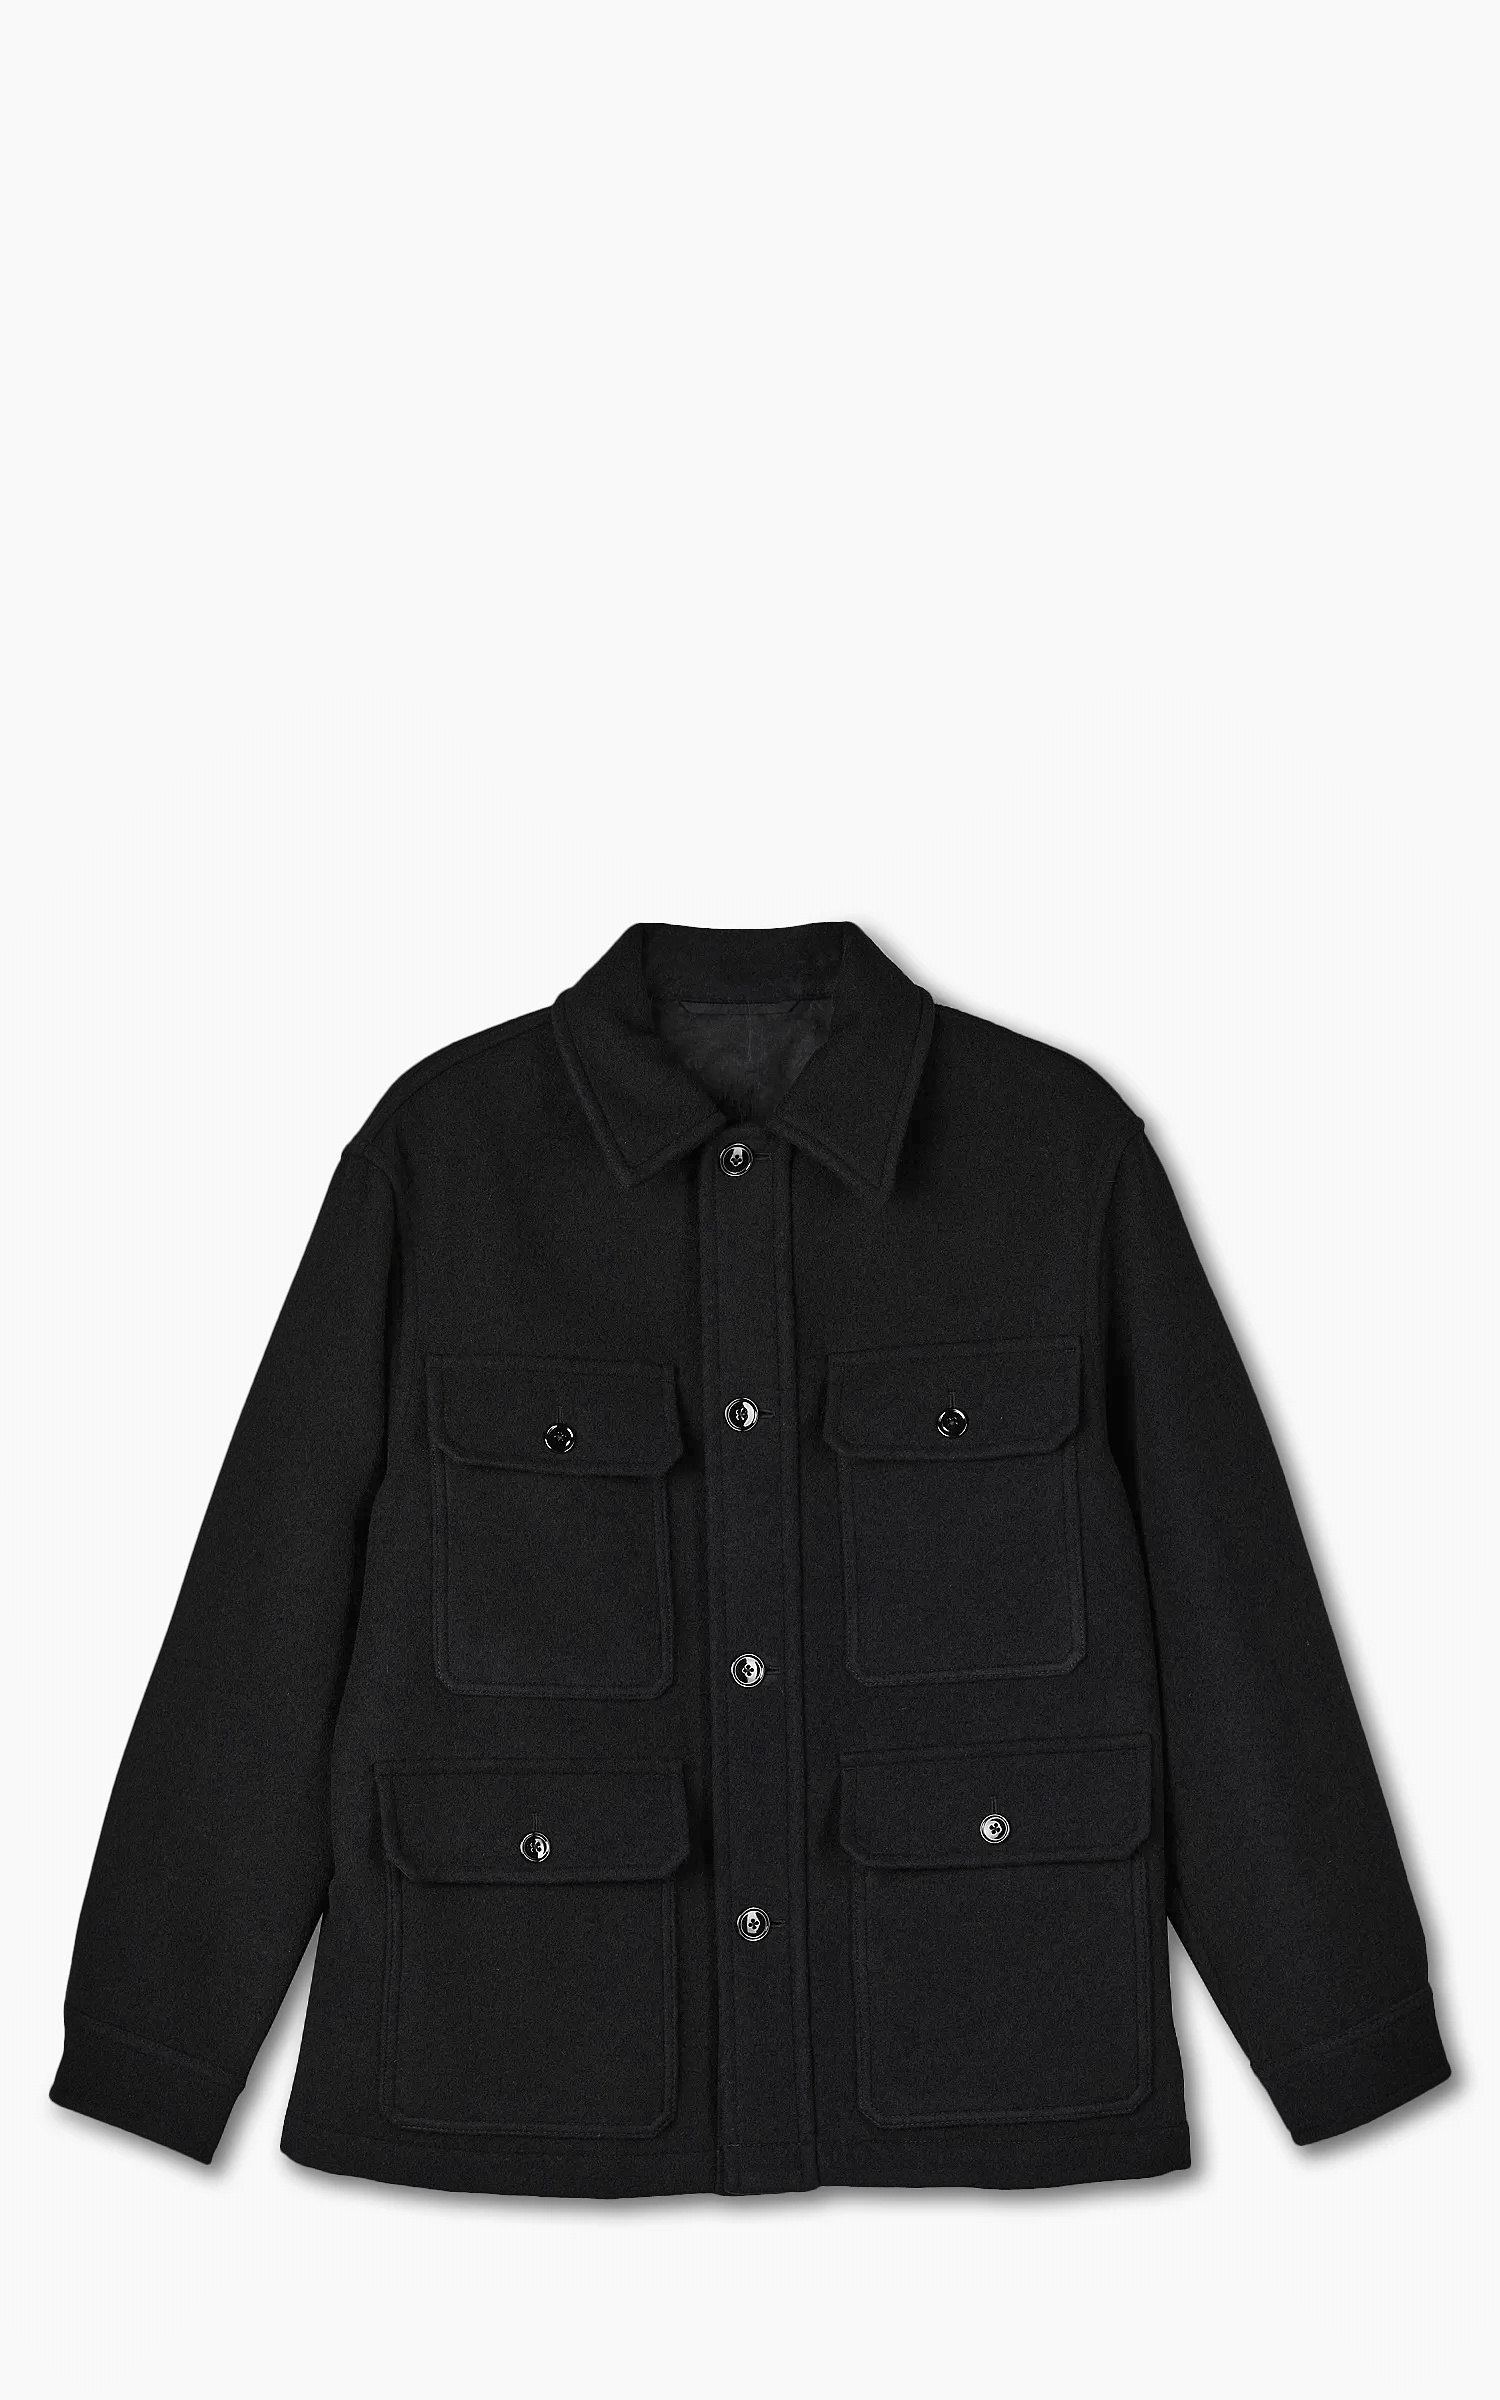 Lemaire Hunting Jacket Wool Black